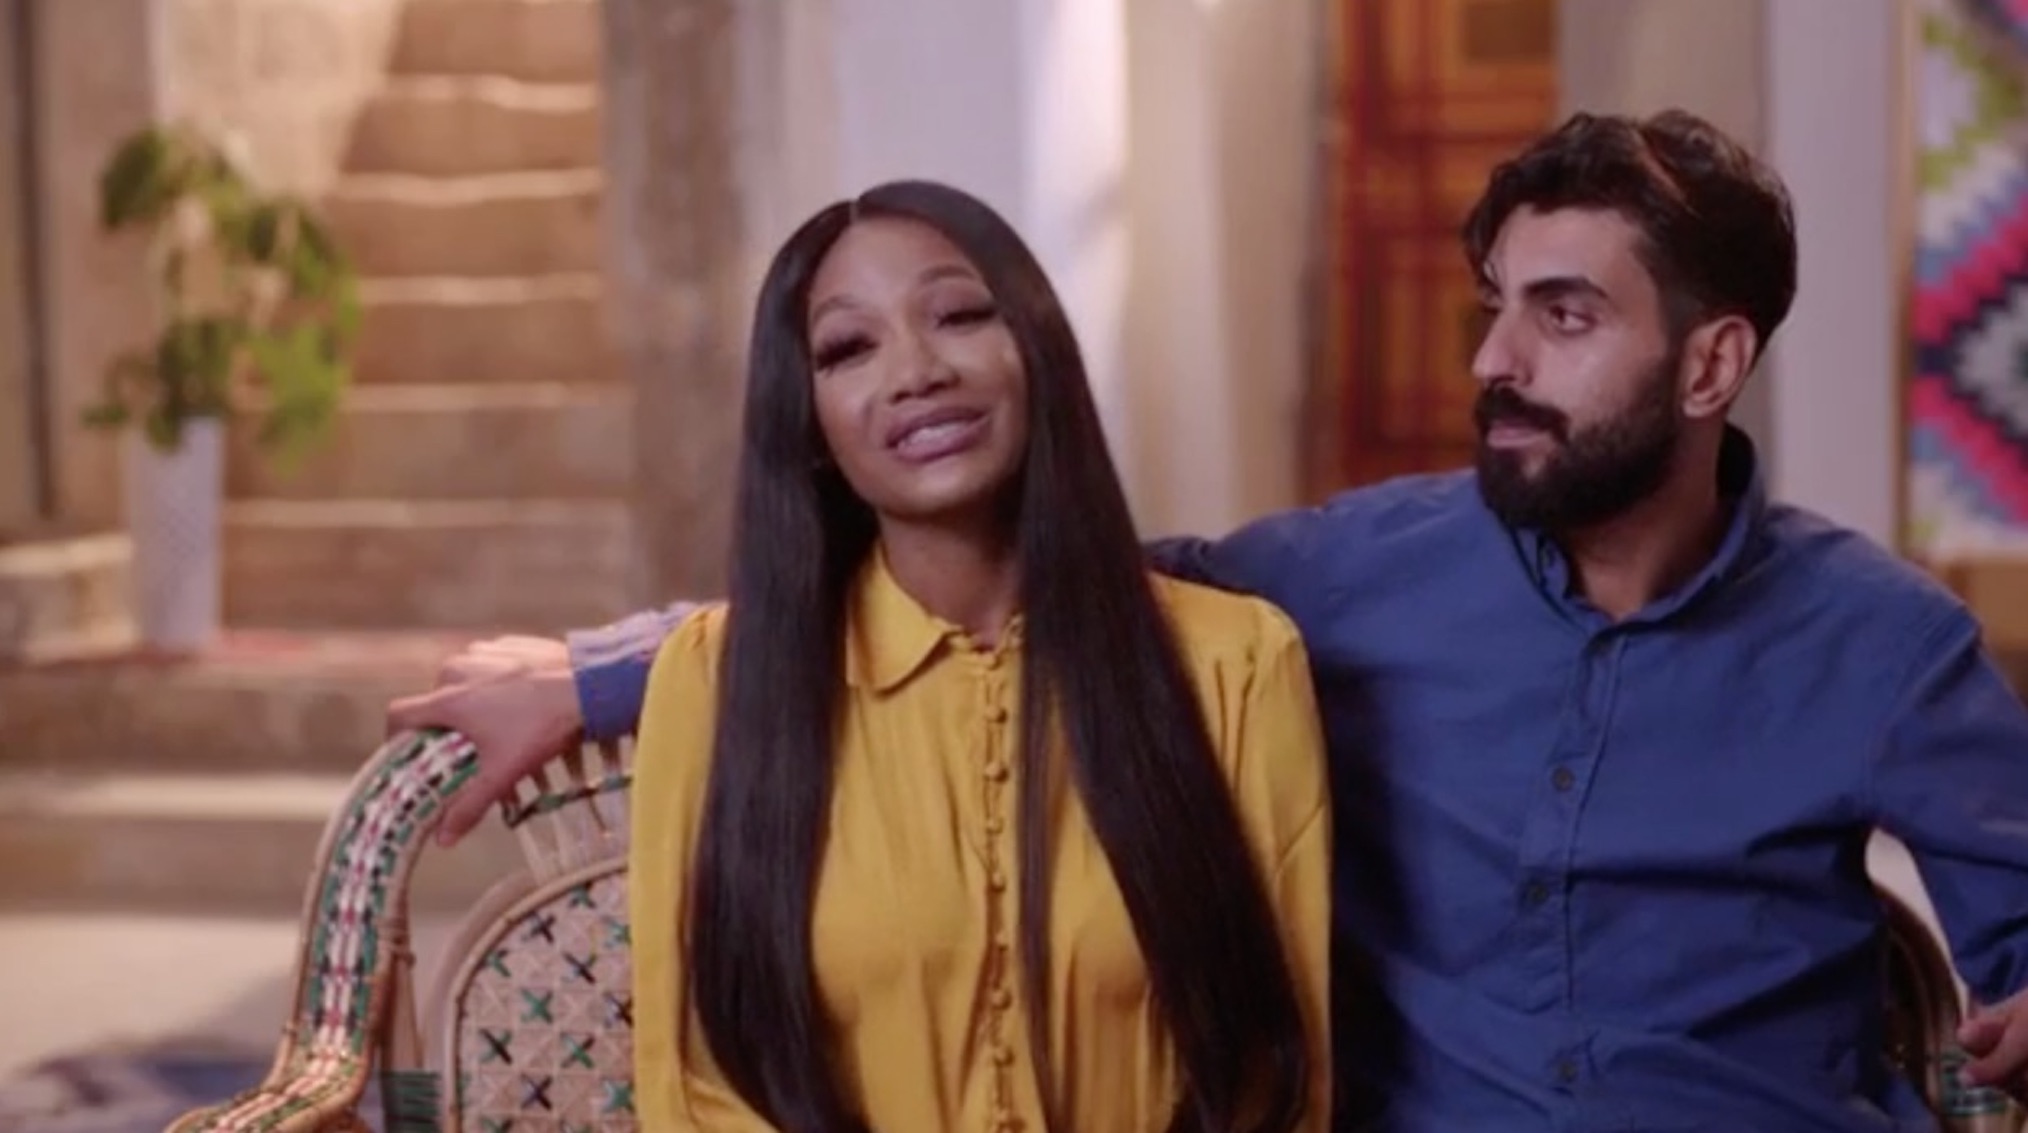 '90 Day Fiancé: The Other Way': Future as Wide as the Ocean (RECAP) - 90 Day Fiancé The Other Way Season 3 Episode 2